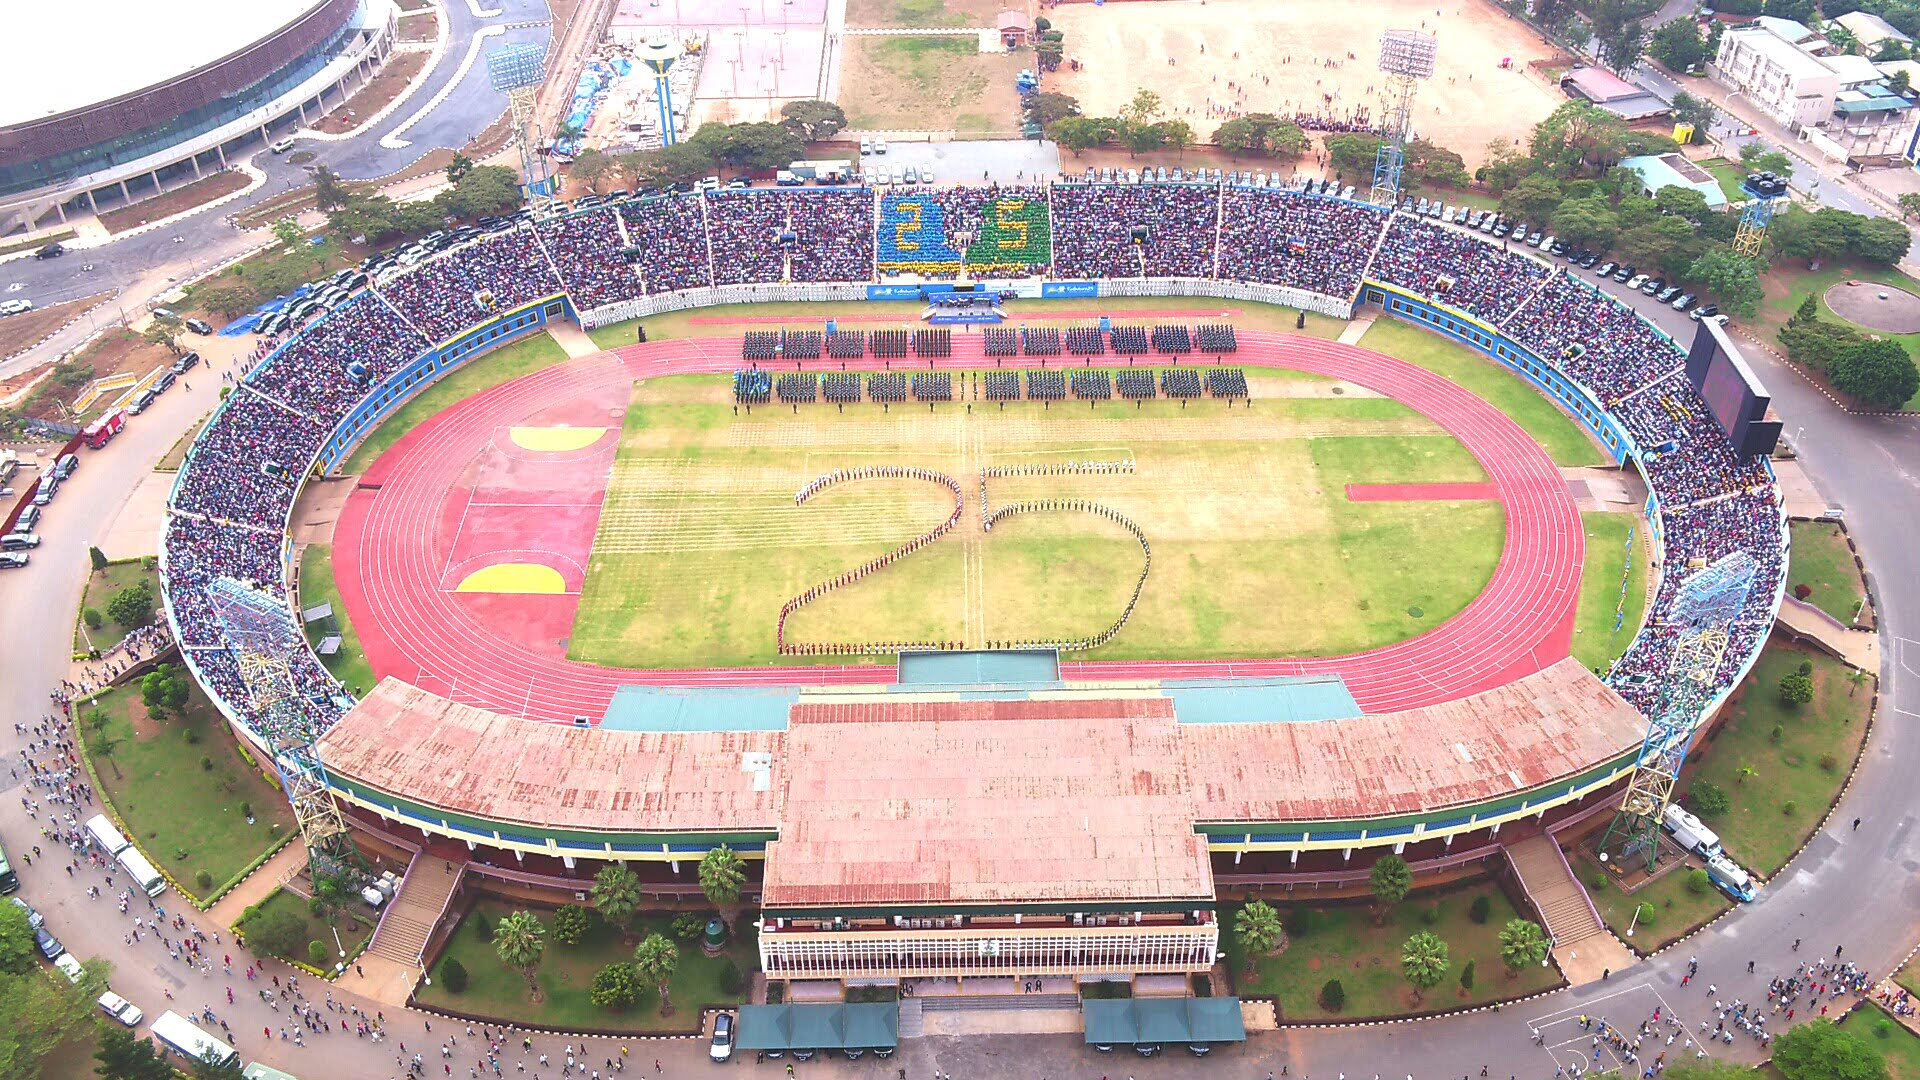 An aerial view of the fully packed Amahoro National Stadium. The crowd was mainly excited by the parade.